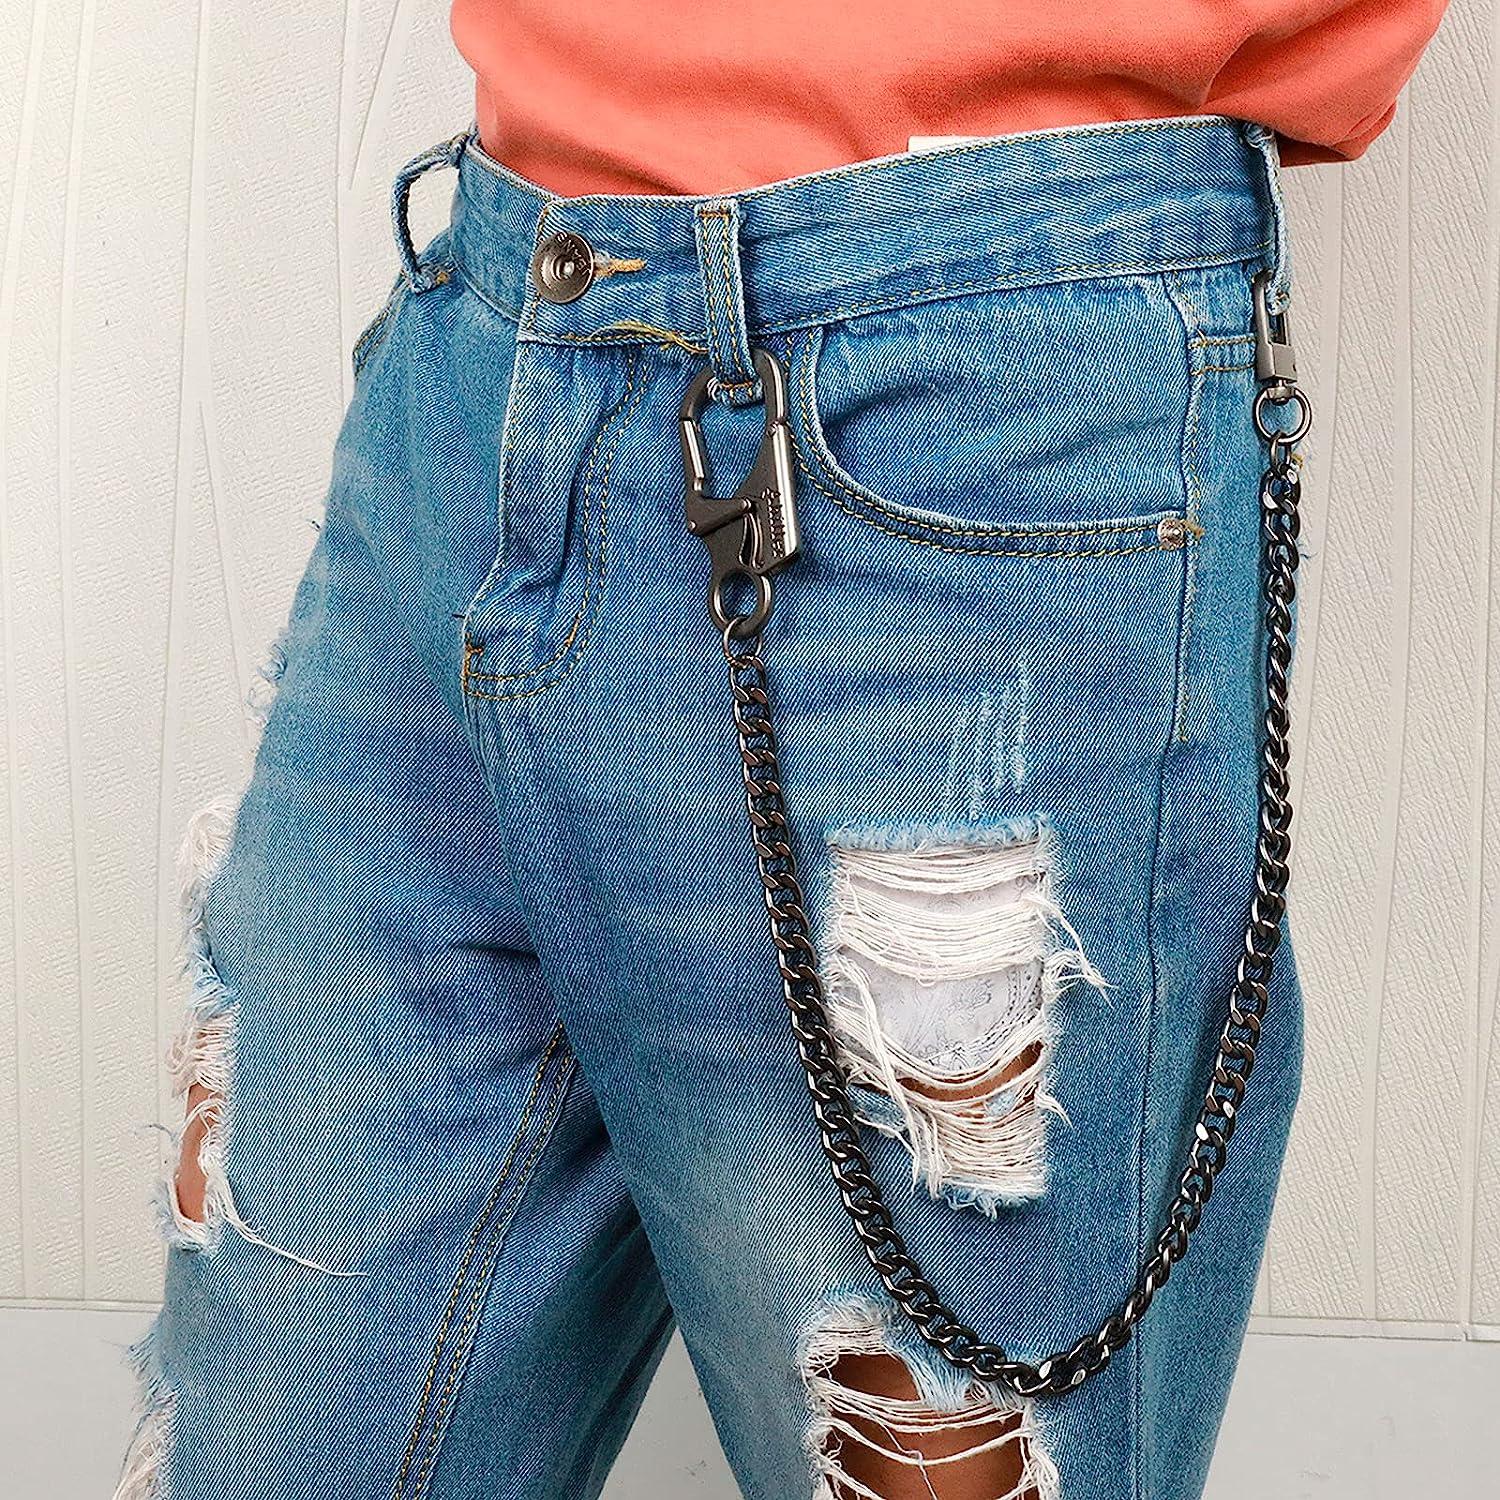 Pant Chain Novelty Fashion Lock Decorative Trousers Chain Belt Chain for  Women